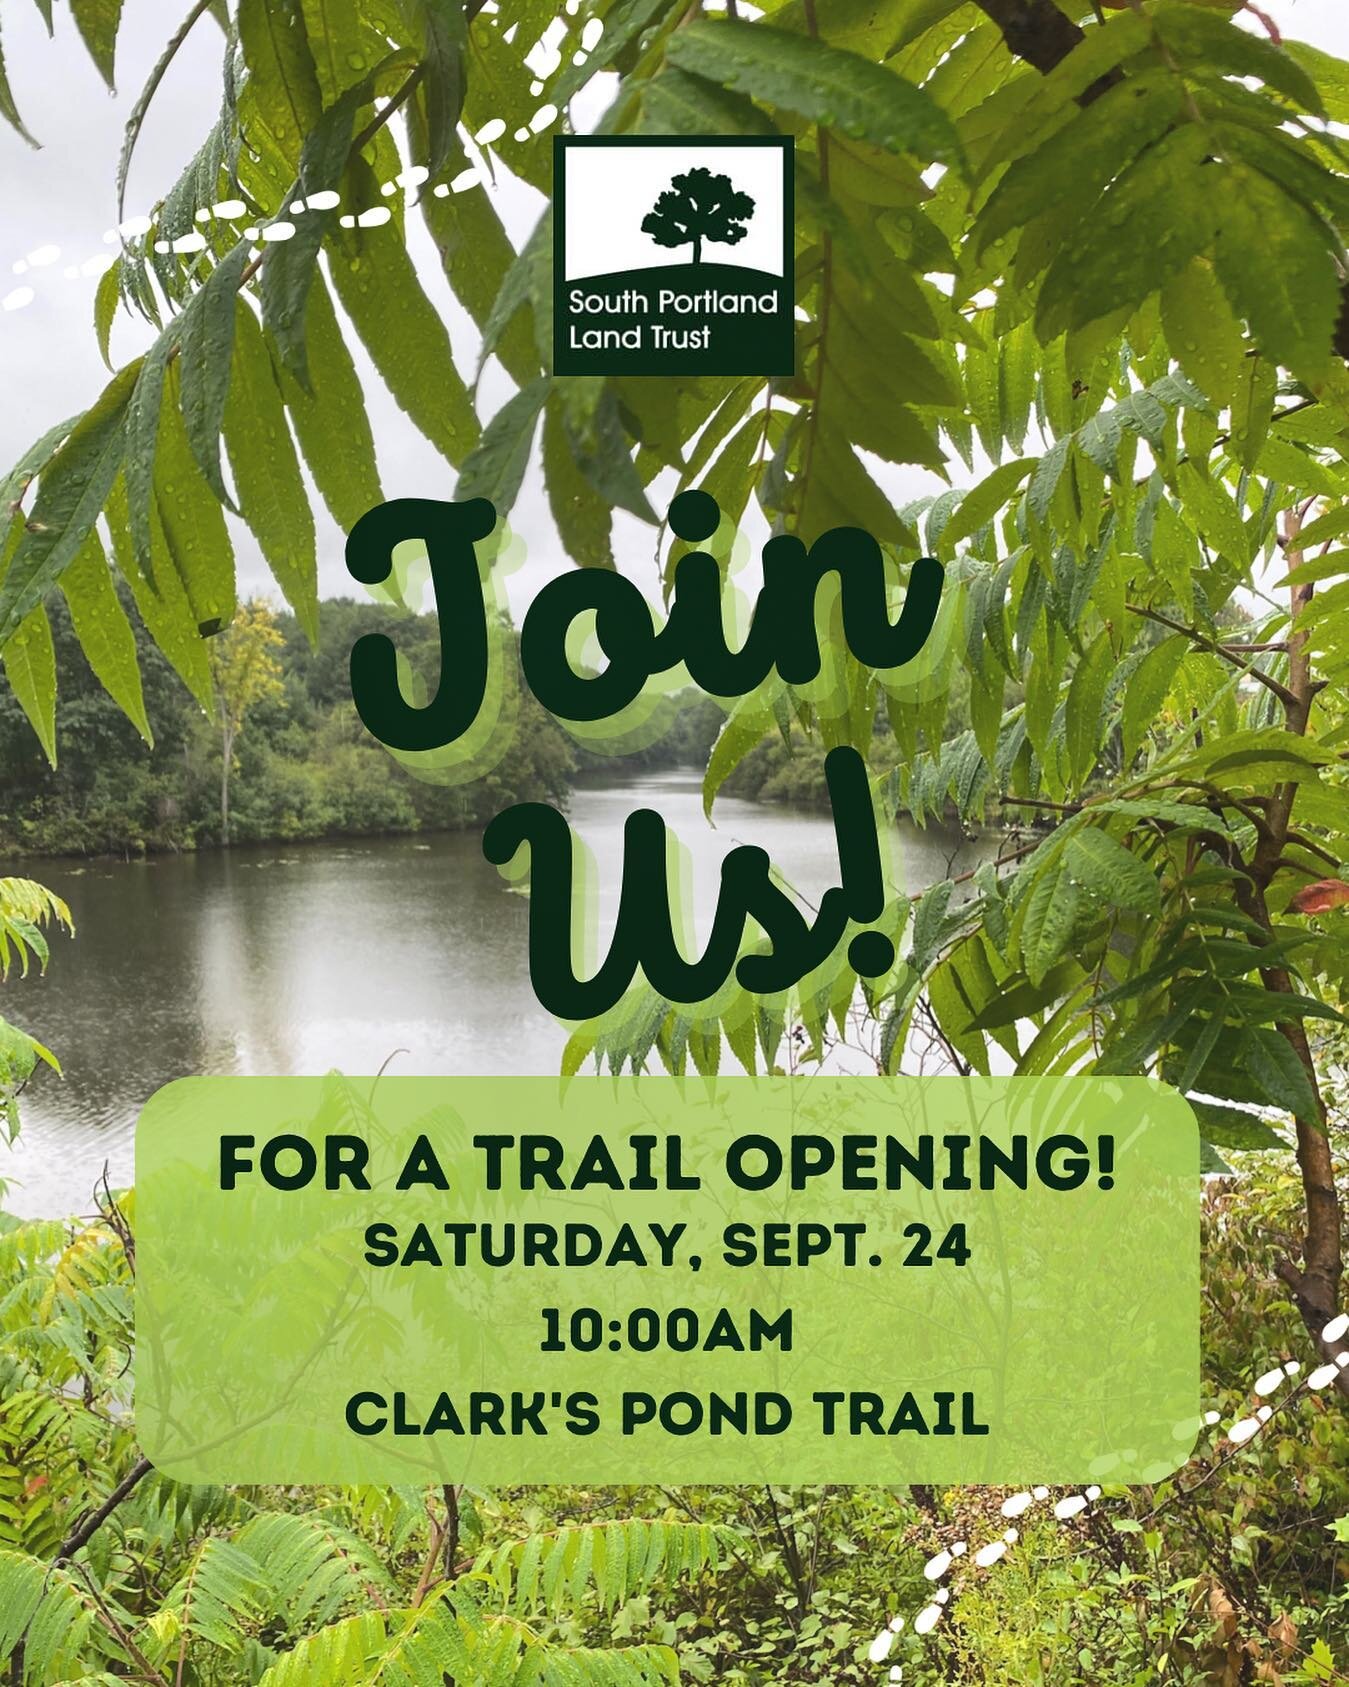 🌿Join us for a trail opening!
𝐒𝐚𝐭𝐮𝐫𝐝𝐚𝐲, 𝐒𝐞𝐩𝐭𝐞𝐦𝐛𝐞𝐫 𝟐𝟒𝐭𝐡
𝟒𝟕𝟒 𝐖𝐞𝐬𝐭𝐛𝐫𝐨𝐨𝐤 𝐒𝐭𝐫𝐞𝐞𝐭 
𝟏𝟎:𝟎𝟎-𝟏𝟎:𝟑𝟎𝐀𝐌

The South Portland Land Trust invites you to attend the long-awaited official opening of one of South Portla